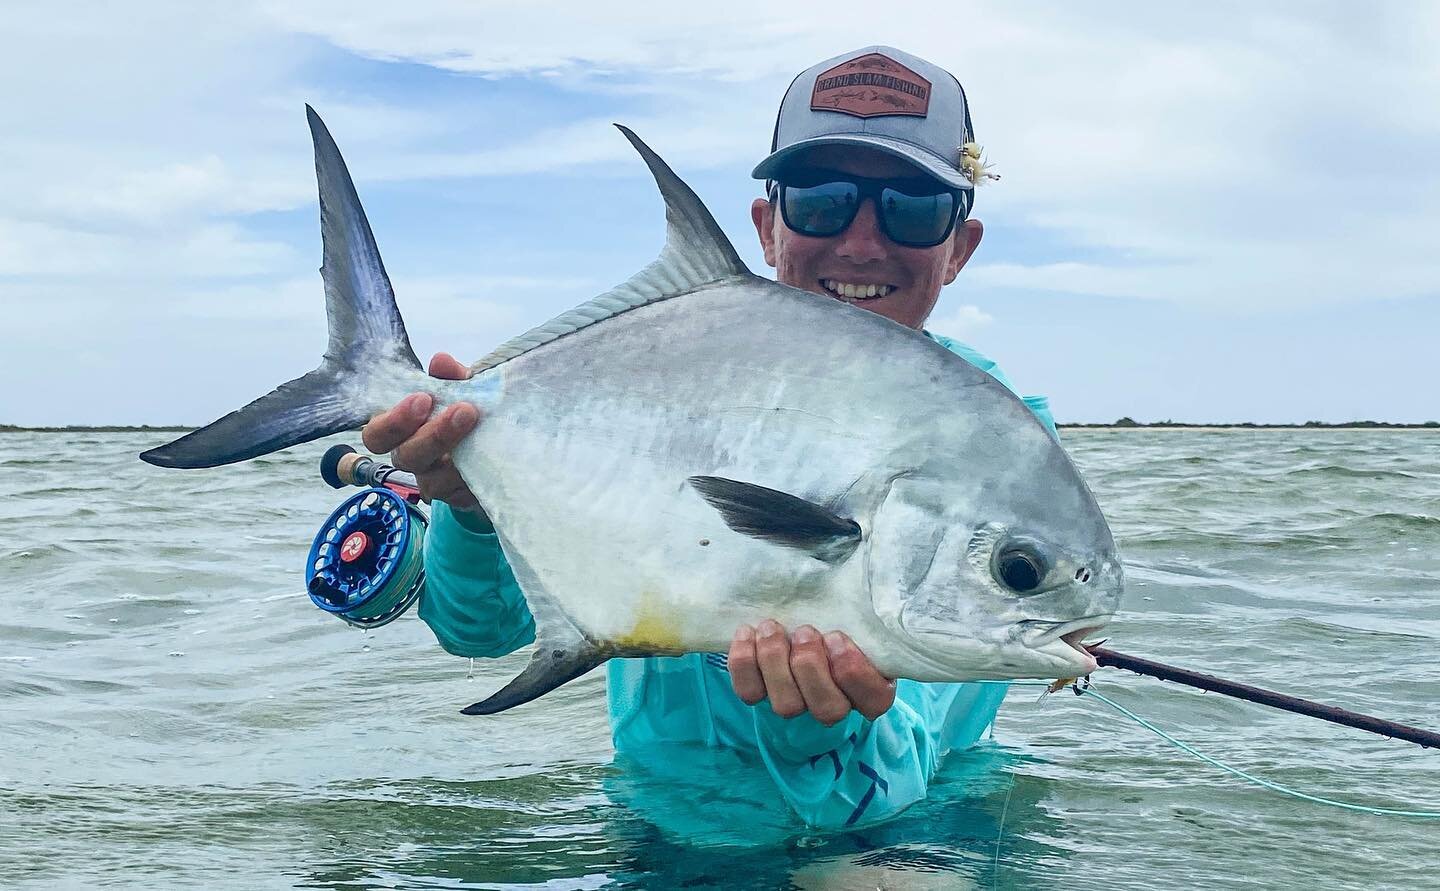 What an incredible week of traveling to an amazing place to target palometa as the locals call them. Thanks, @captchris1 for hosting an outstanding trip! 
#Palometa #Permit #Bonefish #Mexico #Flyfishing